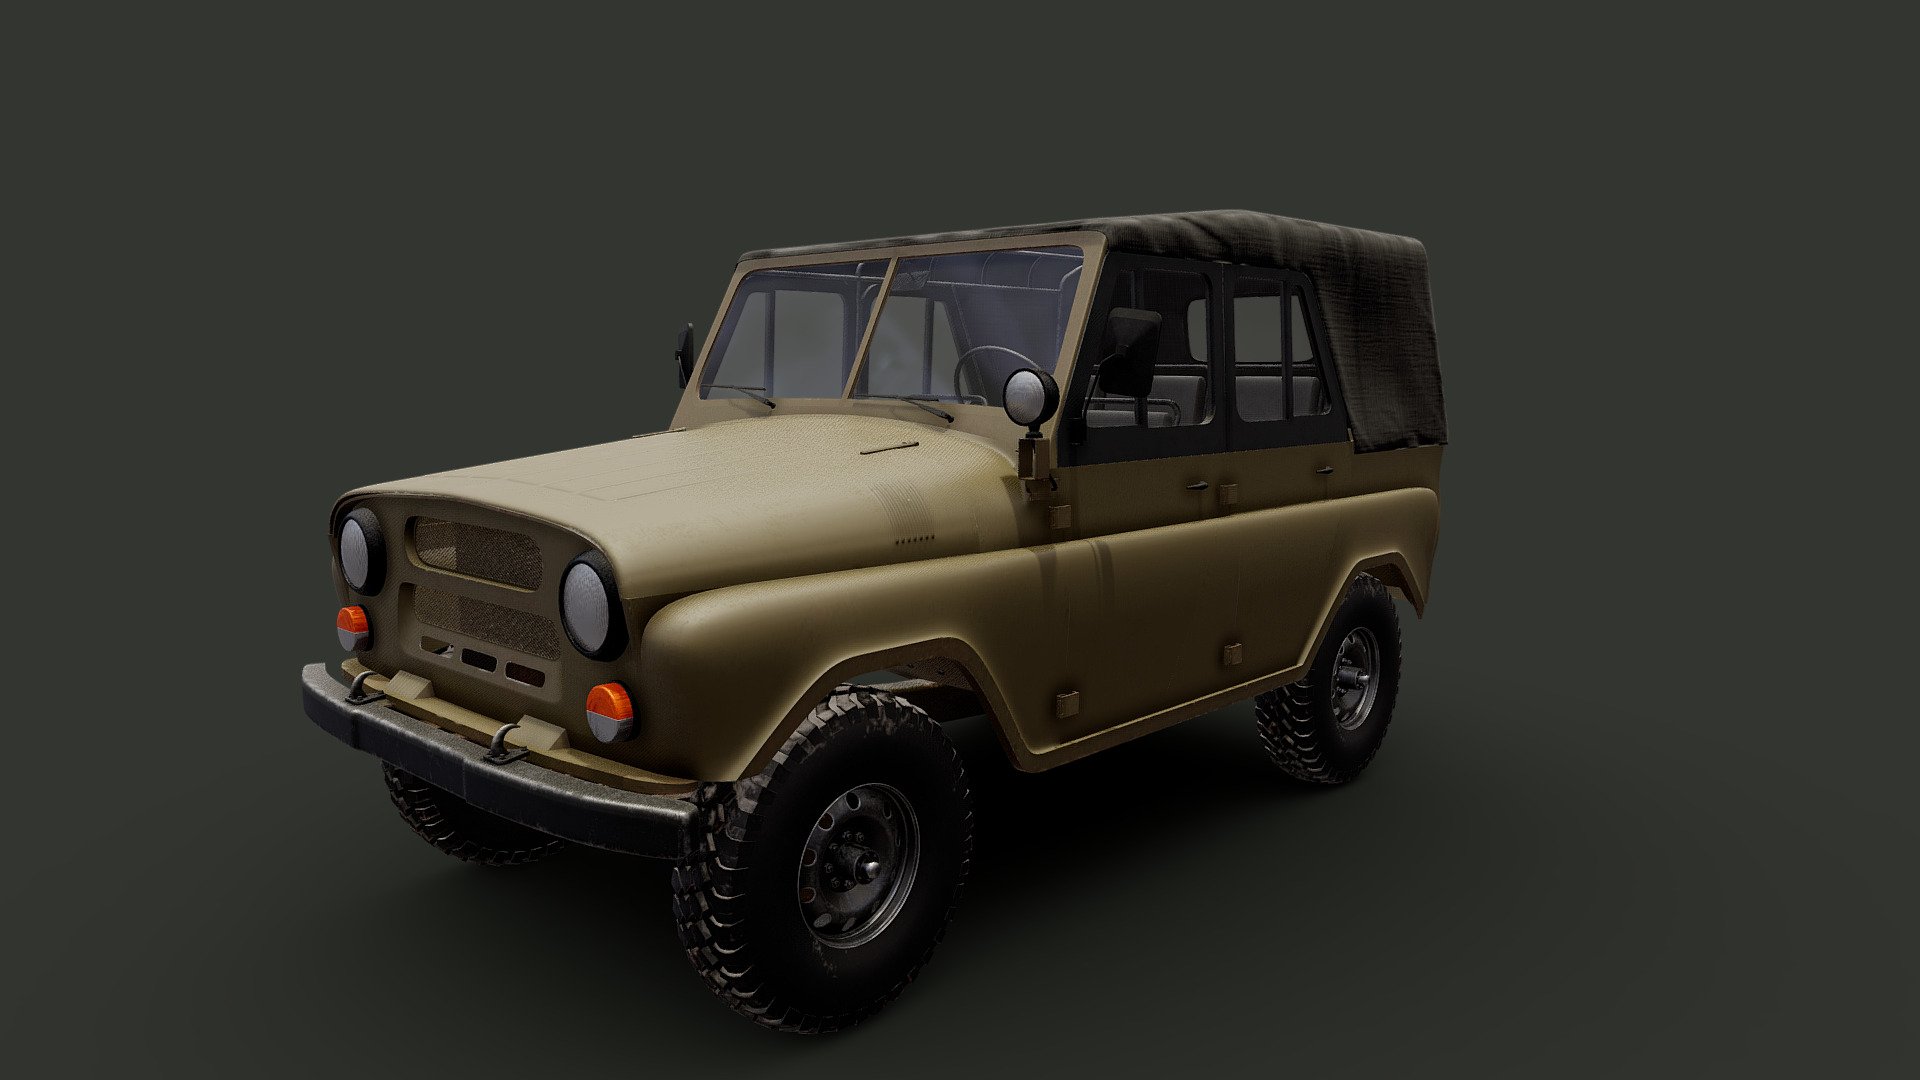 The UAZ-469 is an off-road military light utility vehicle manufactured by UAZ. It was used by Soviet and other Warsaw Pact armed forces, as well as paramilitary units in Eastern Bloc countries. In the Soviet Union, it also saw widespread service in state organizations that needed a robust and durable off-road vehicle. Standard military versions included seating for seven personnel 3d model